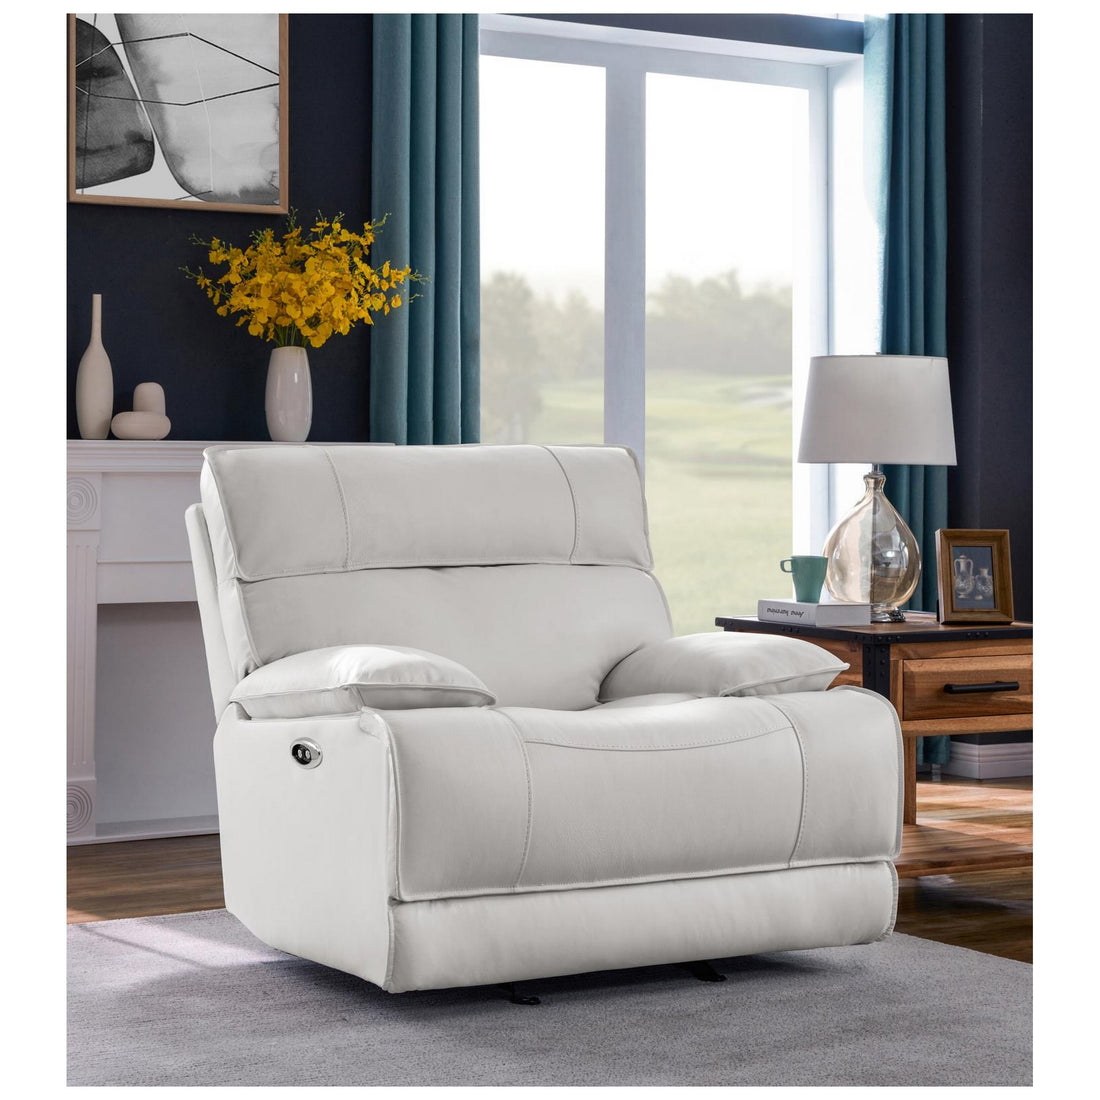 Coaster Stanford Upholstered Pillow Top Arm Power Glider Recliner White